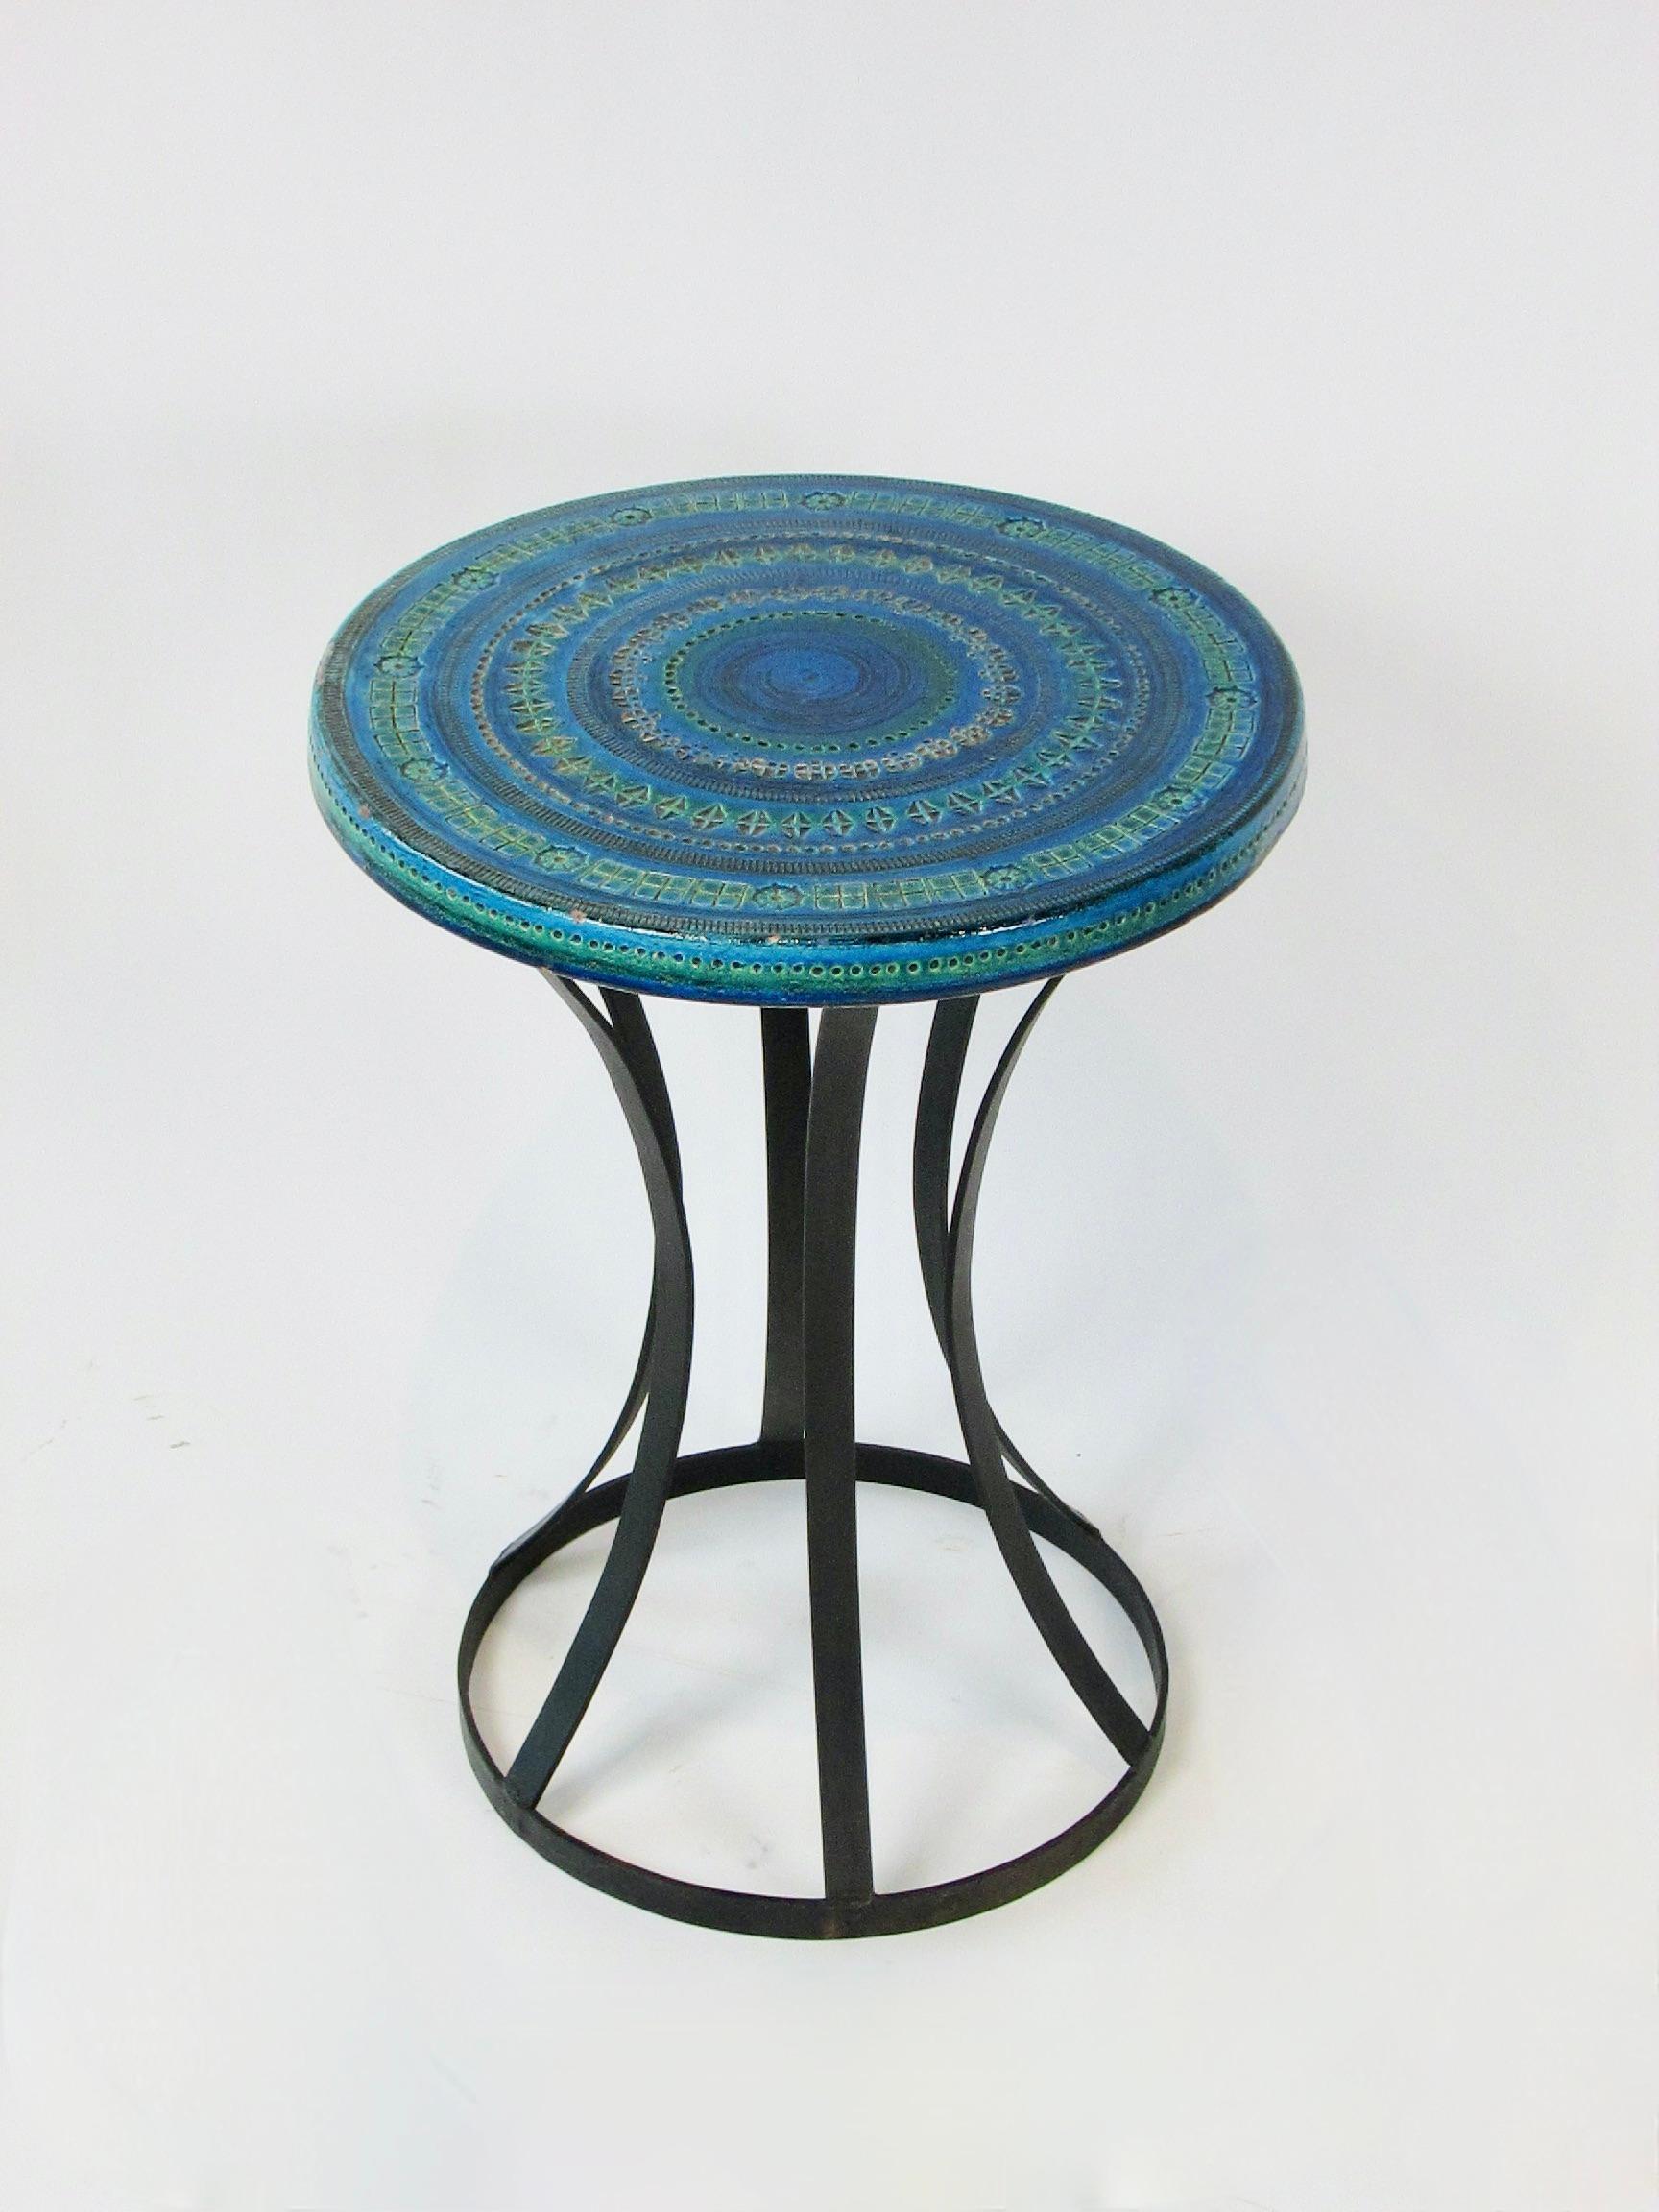 Blue Green Aldo Londi Bitossi for Raymor Pottery Table Top on Wrought Base For Sale 2